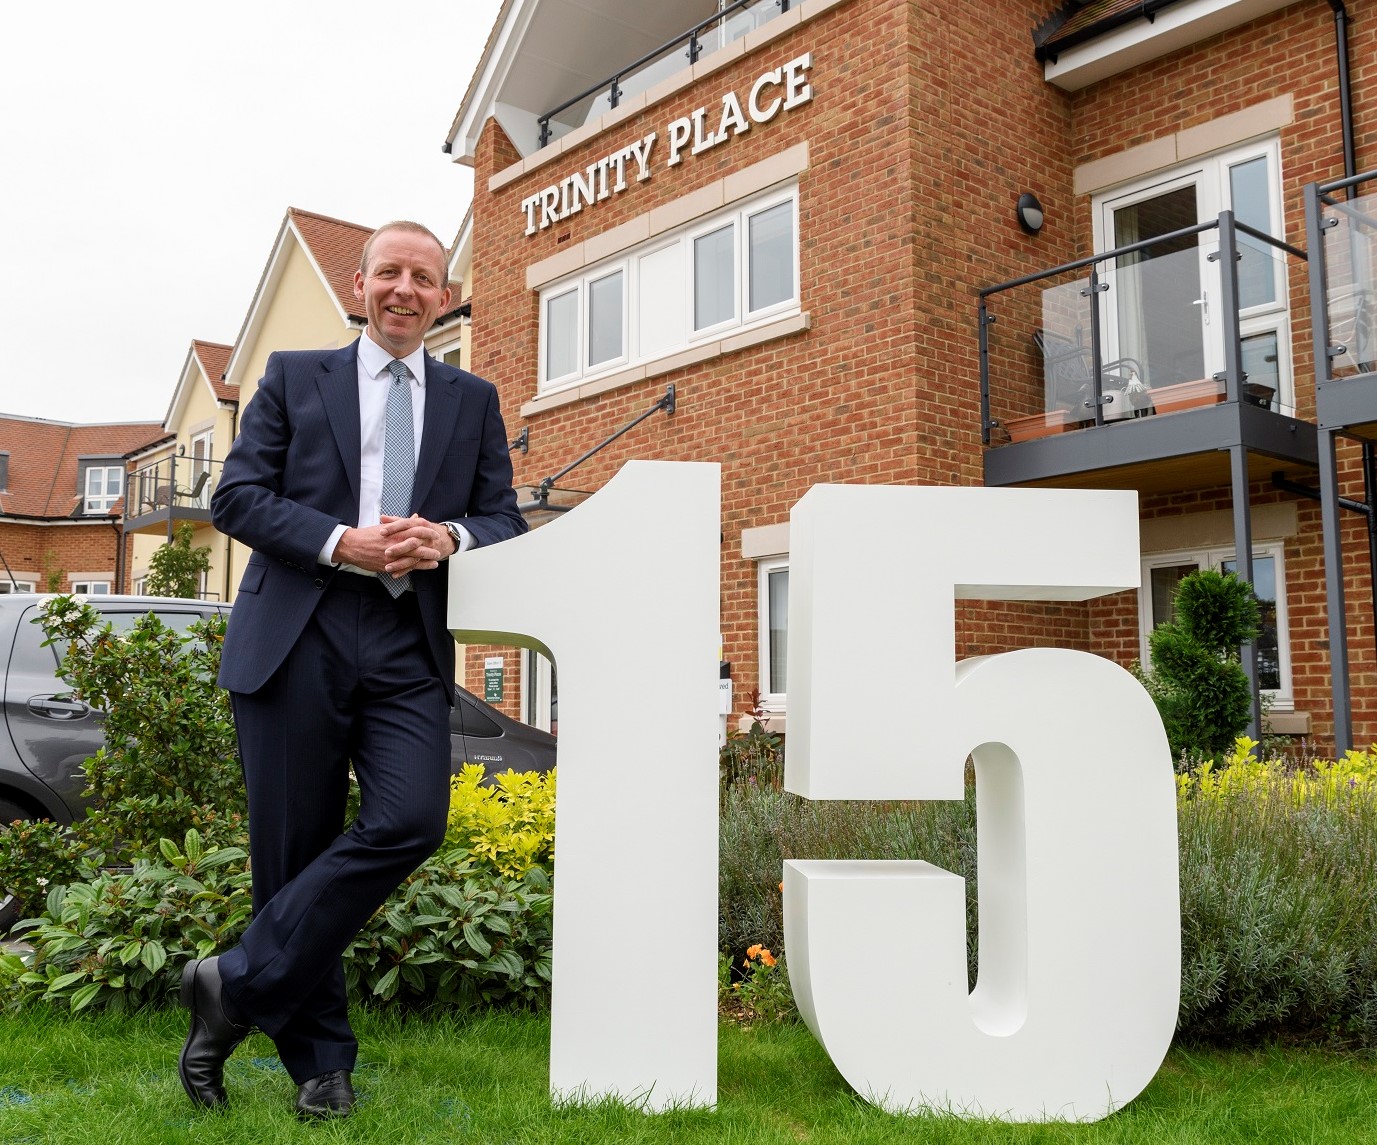 FEATURED | Hereford Developer Secures Five Star Status for Record 15th Consecutive Year